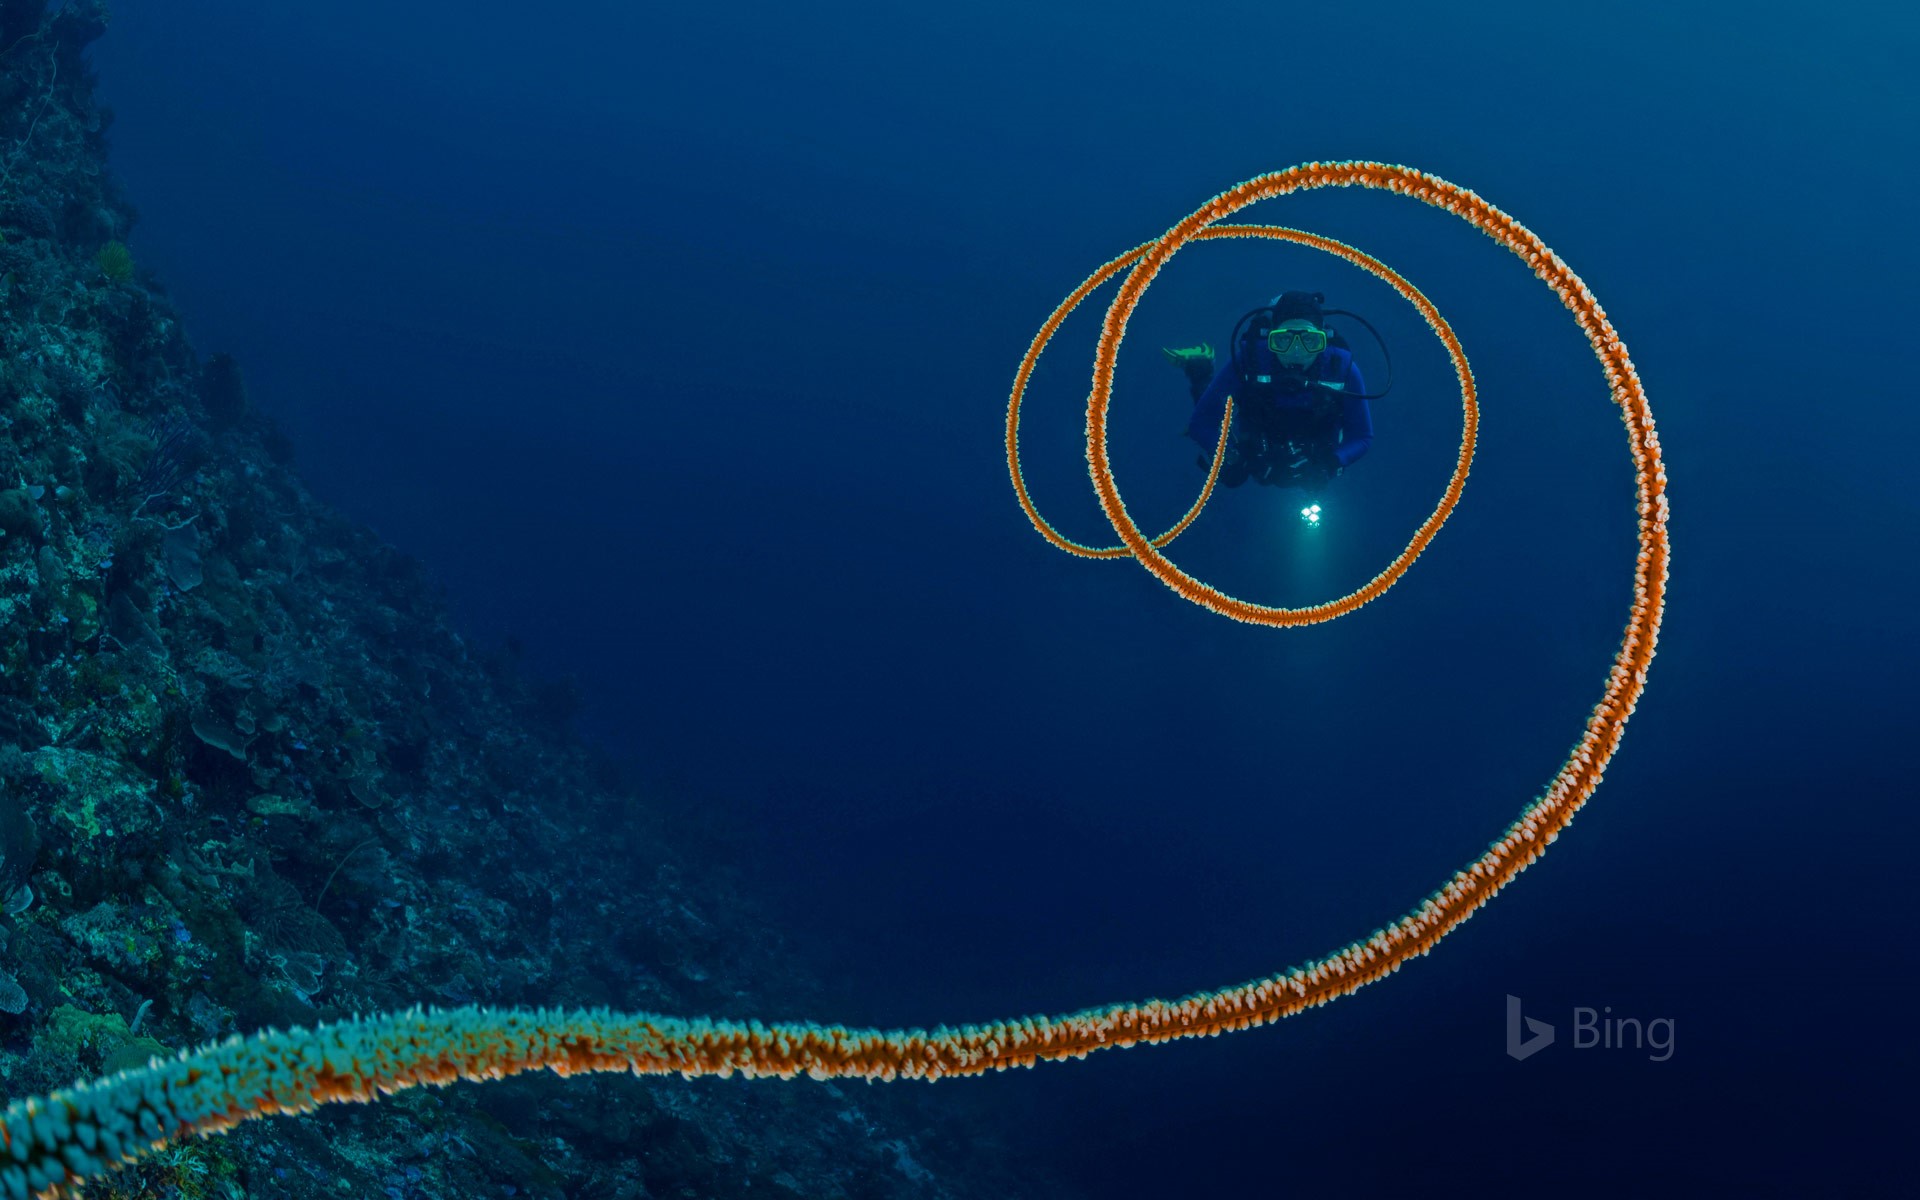 Spiral whip coral off the coast of Indonesia